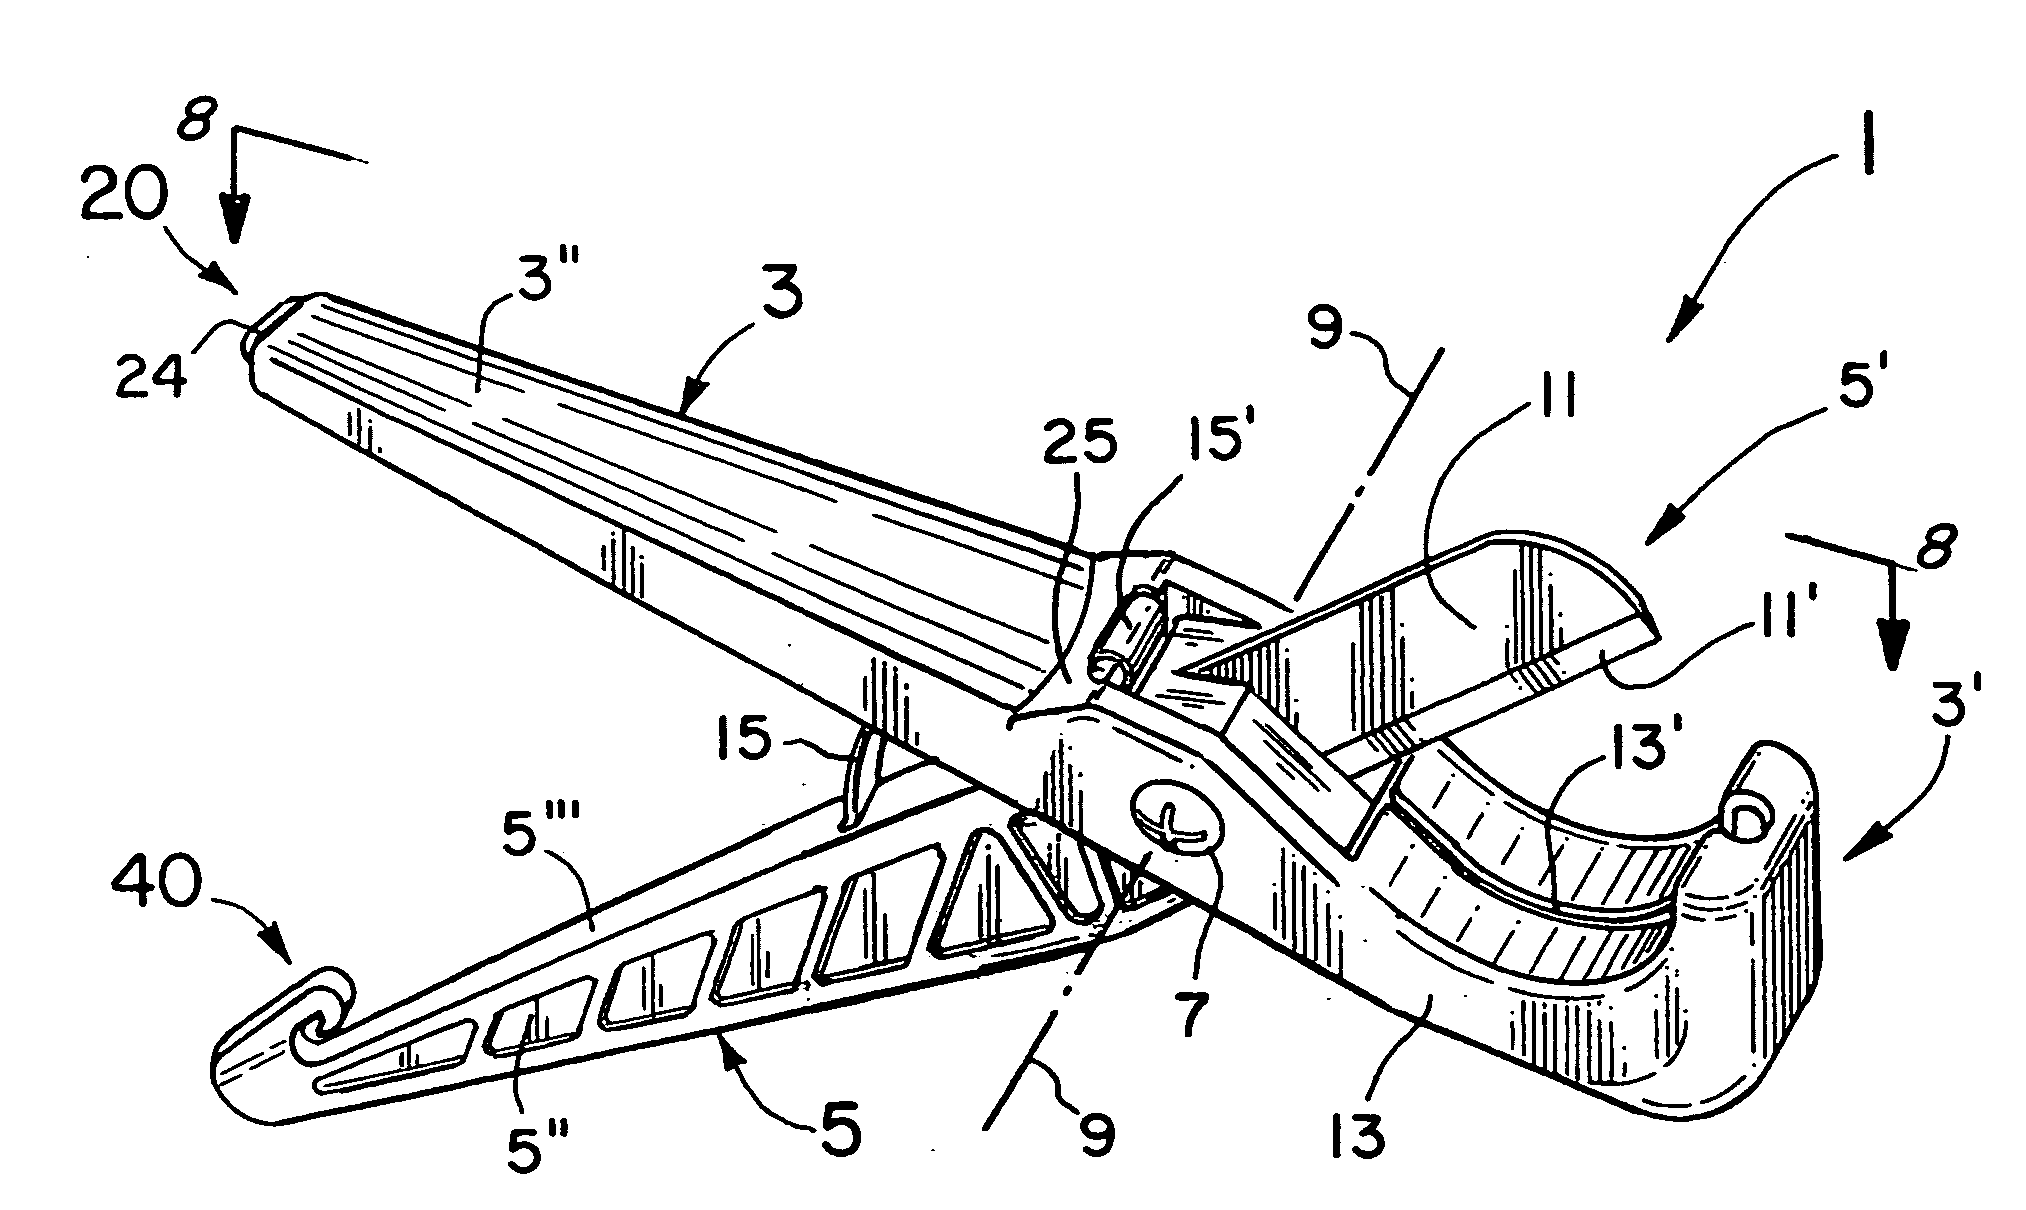 Self-locking cutting tool for plastic pipes